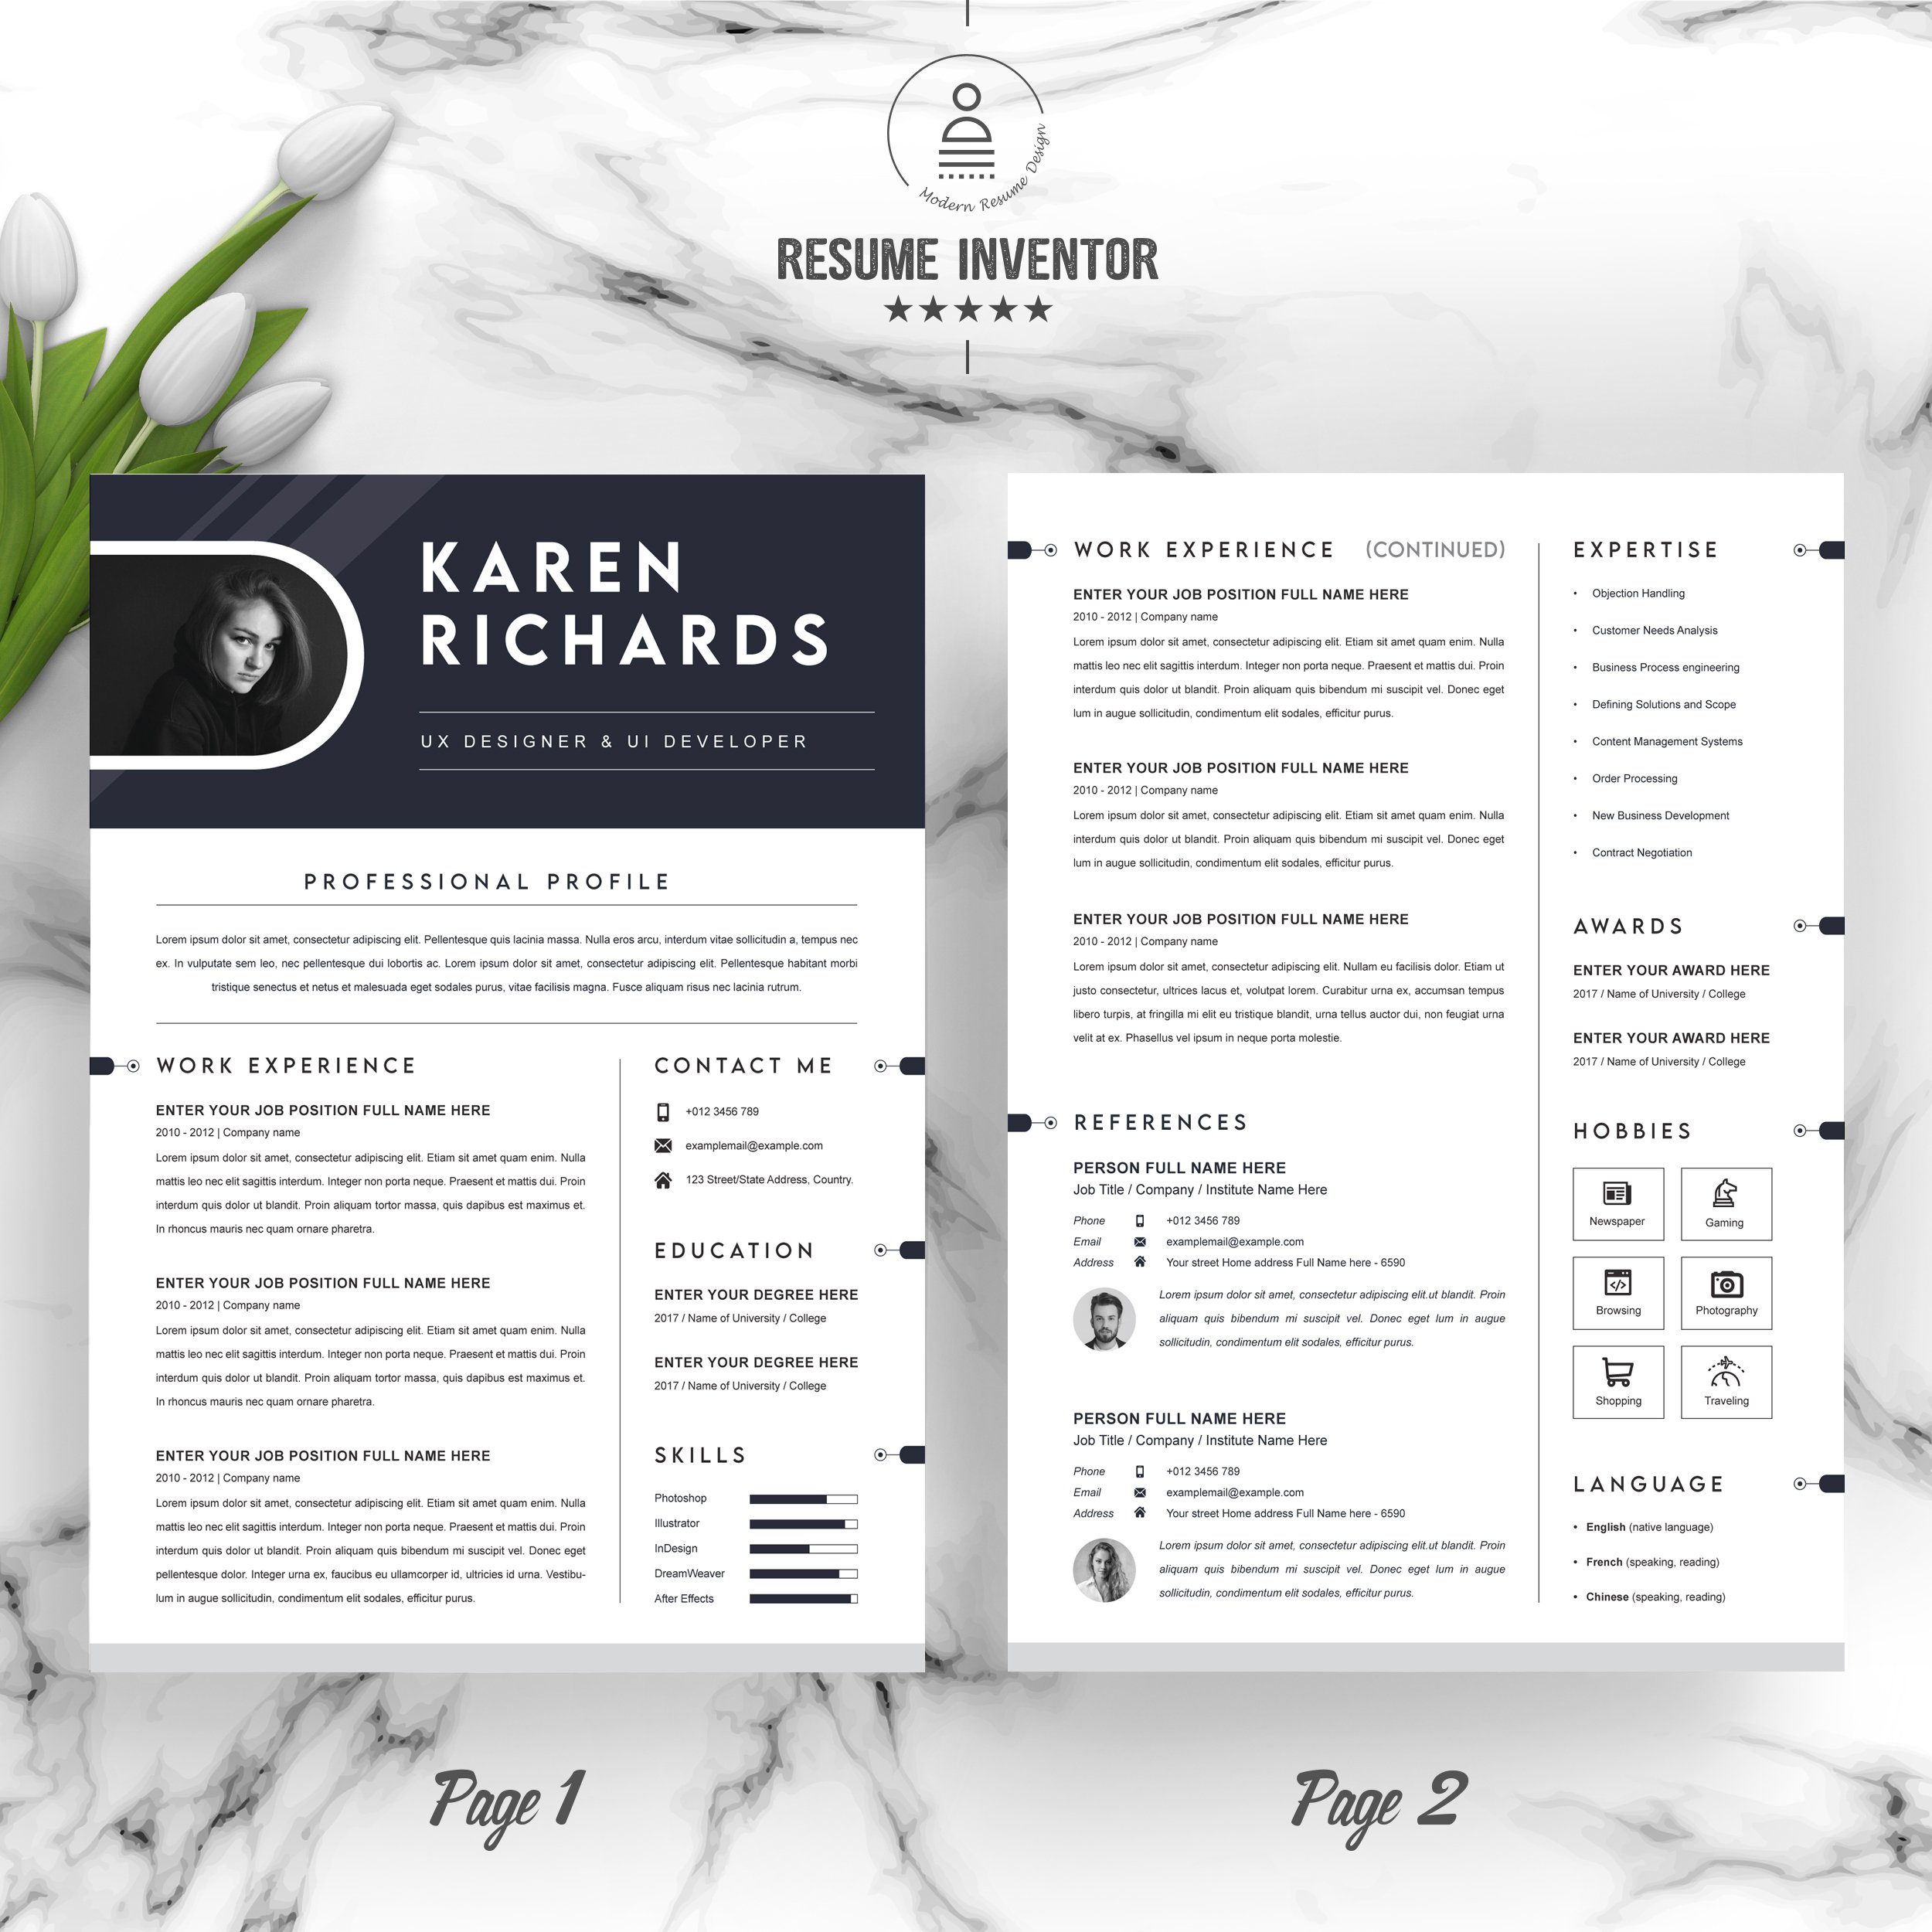 Resume Template / Curriculum Vitae preview image.